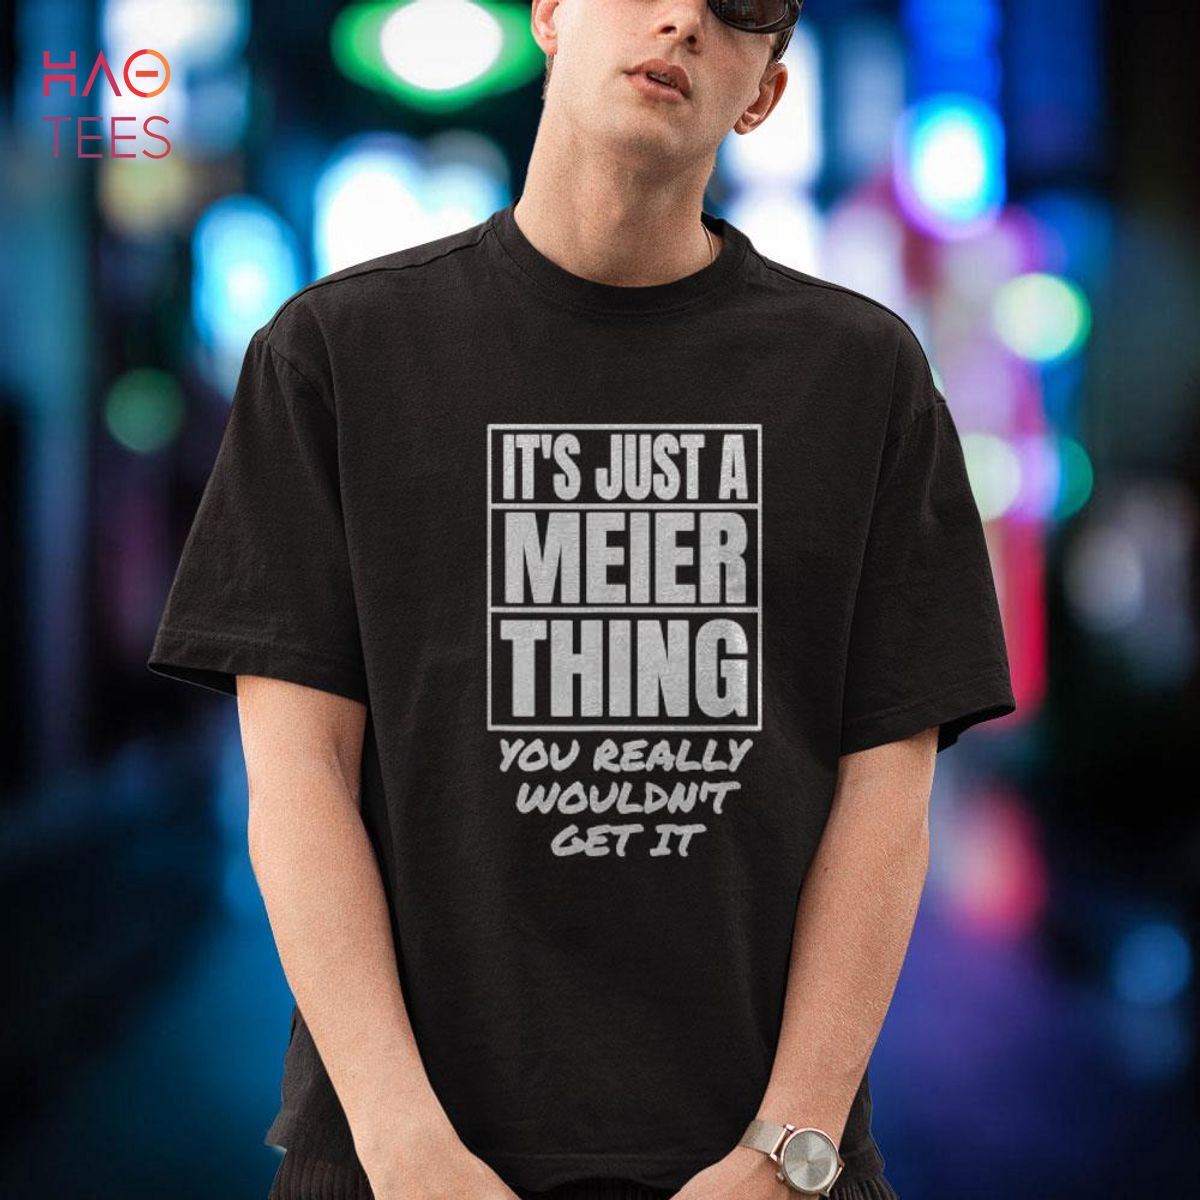 It’s Just A Meier Thing You Really Wouldn’t Get It Shirt